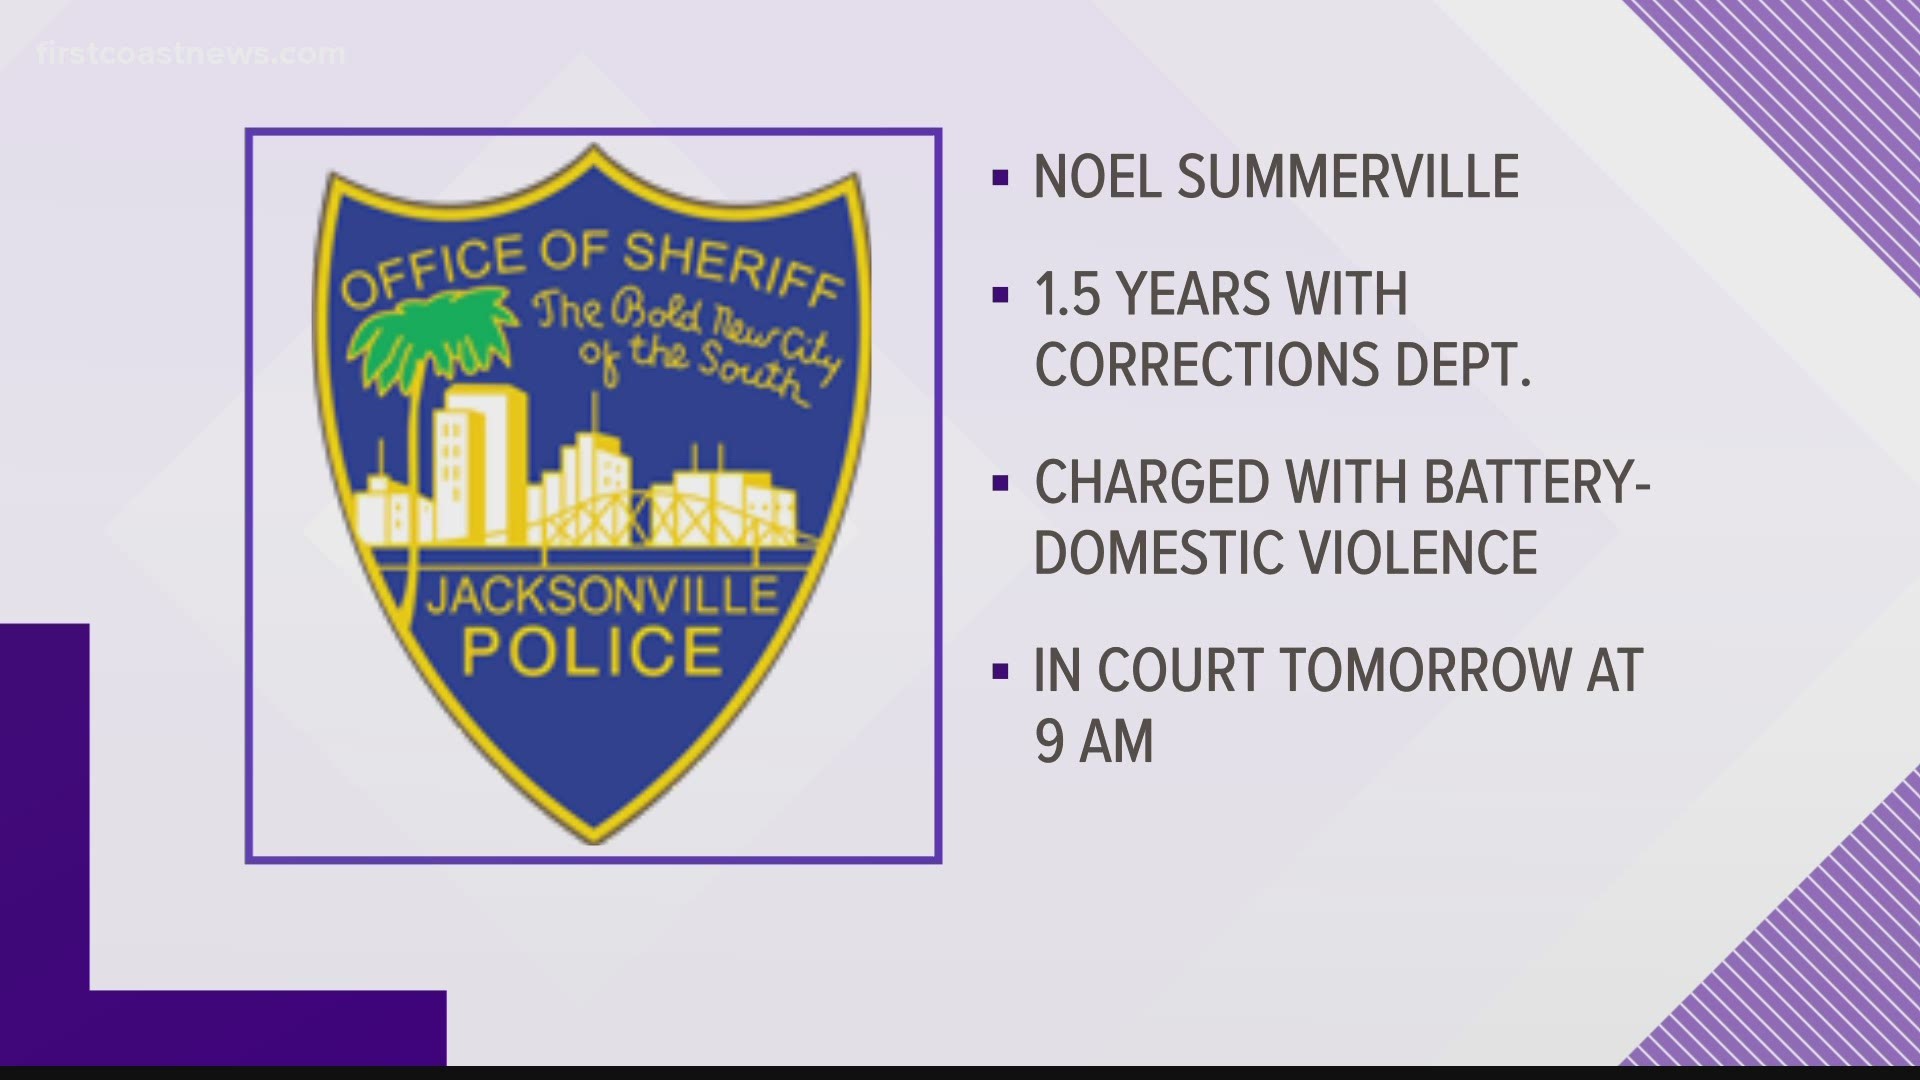 Corrections Officer Noel Summerville, a one-and-a-half-year veteran of JSO, was arrested after officers responded to a domestic violence call around 5 or 6 a.m.